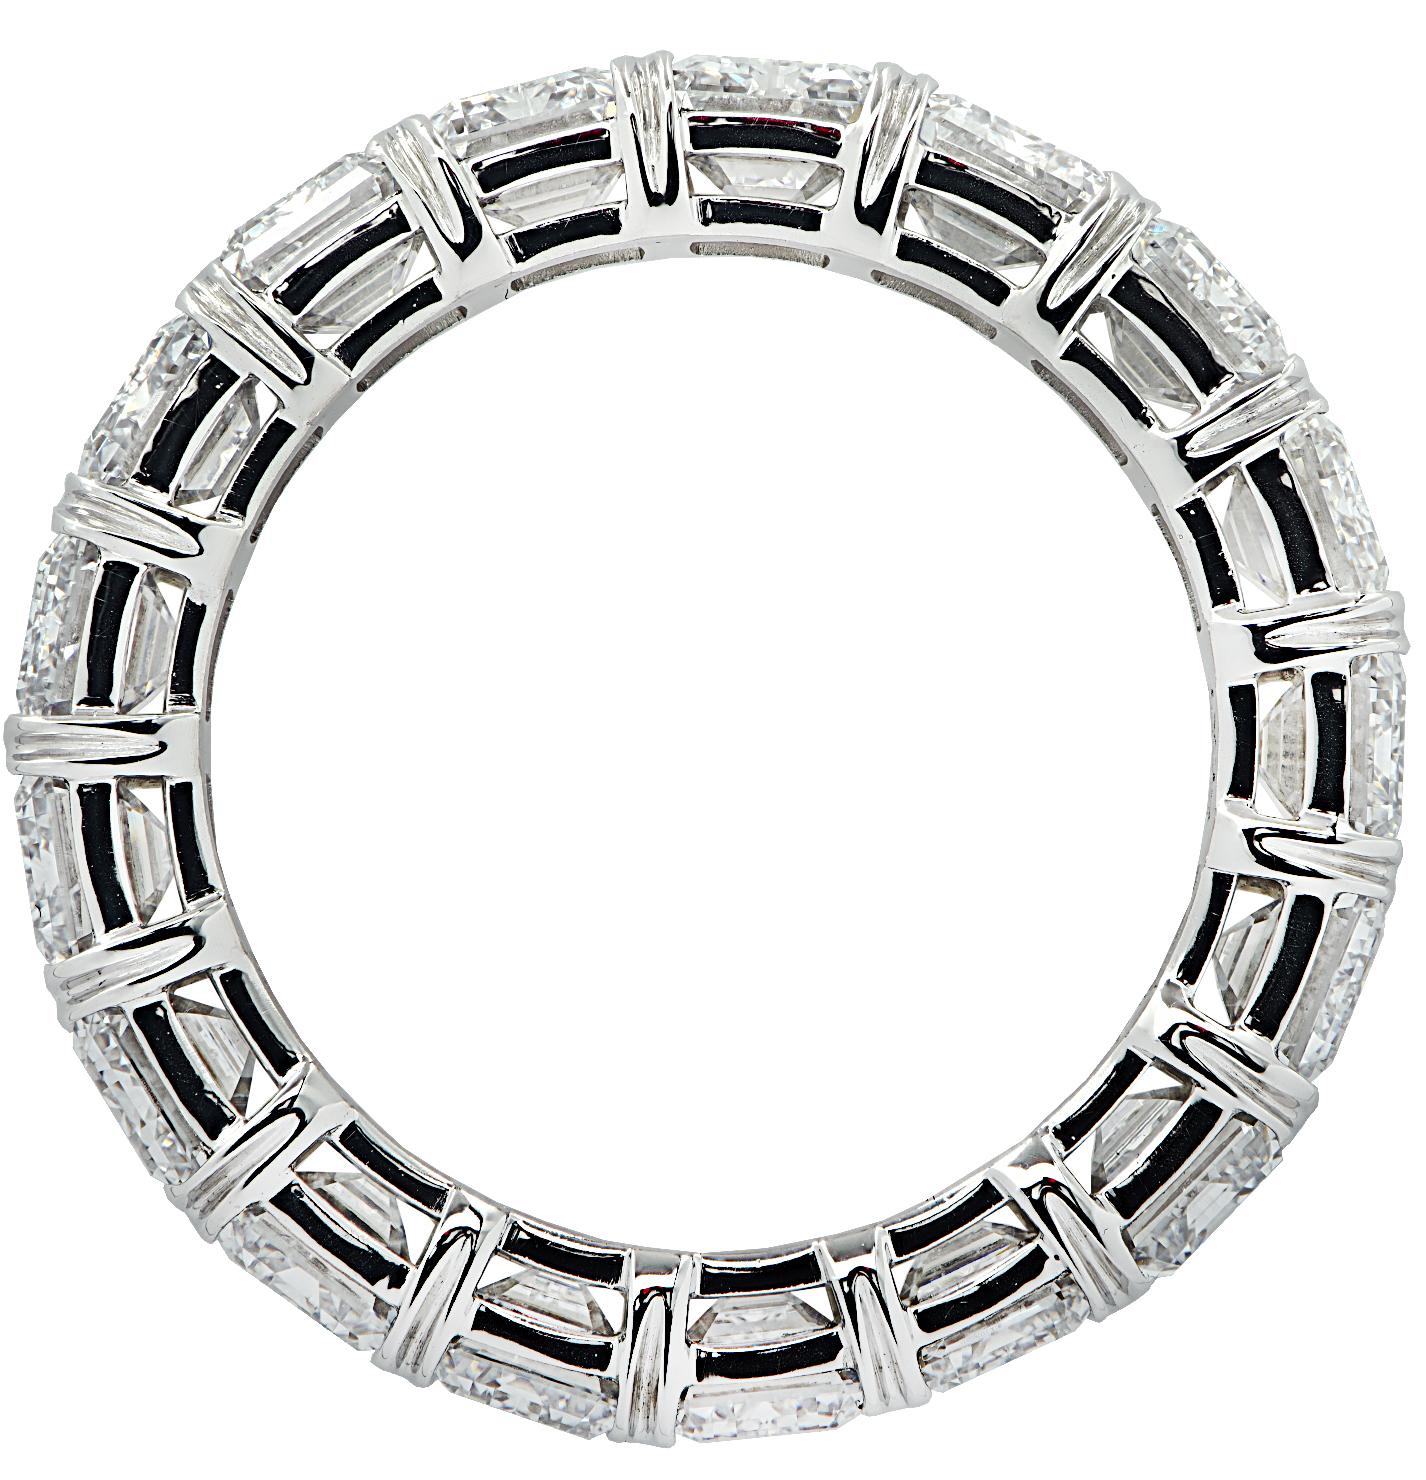 Exquisite Vivid Diamonds eternity band crafted in Platinum, showcasing 18 stunning radiant cut diamonds weighing 5.71 carats total, F-G color, VVS-VS clarity. Each diamond was carefully selected, perfectly matched and set in a seamless sea of